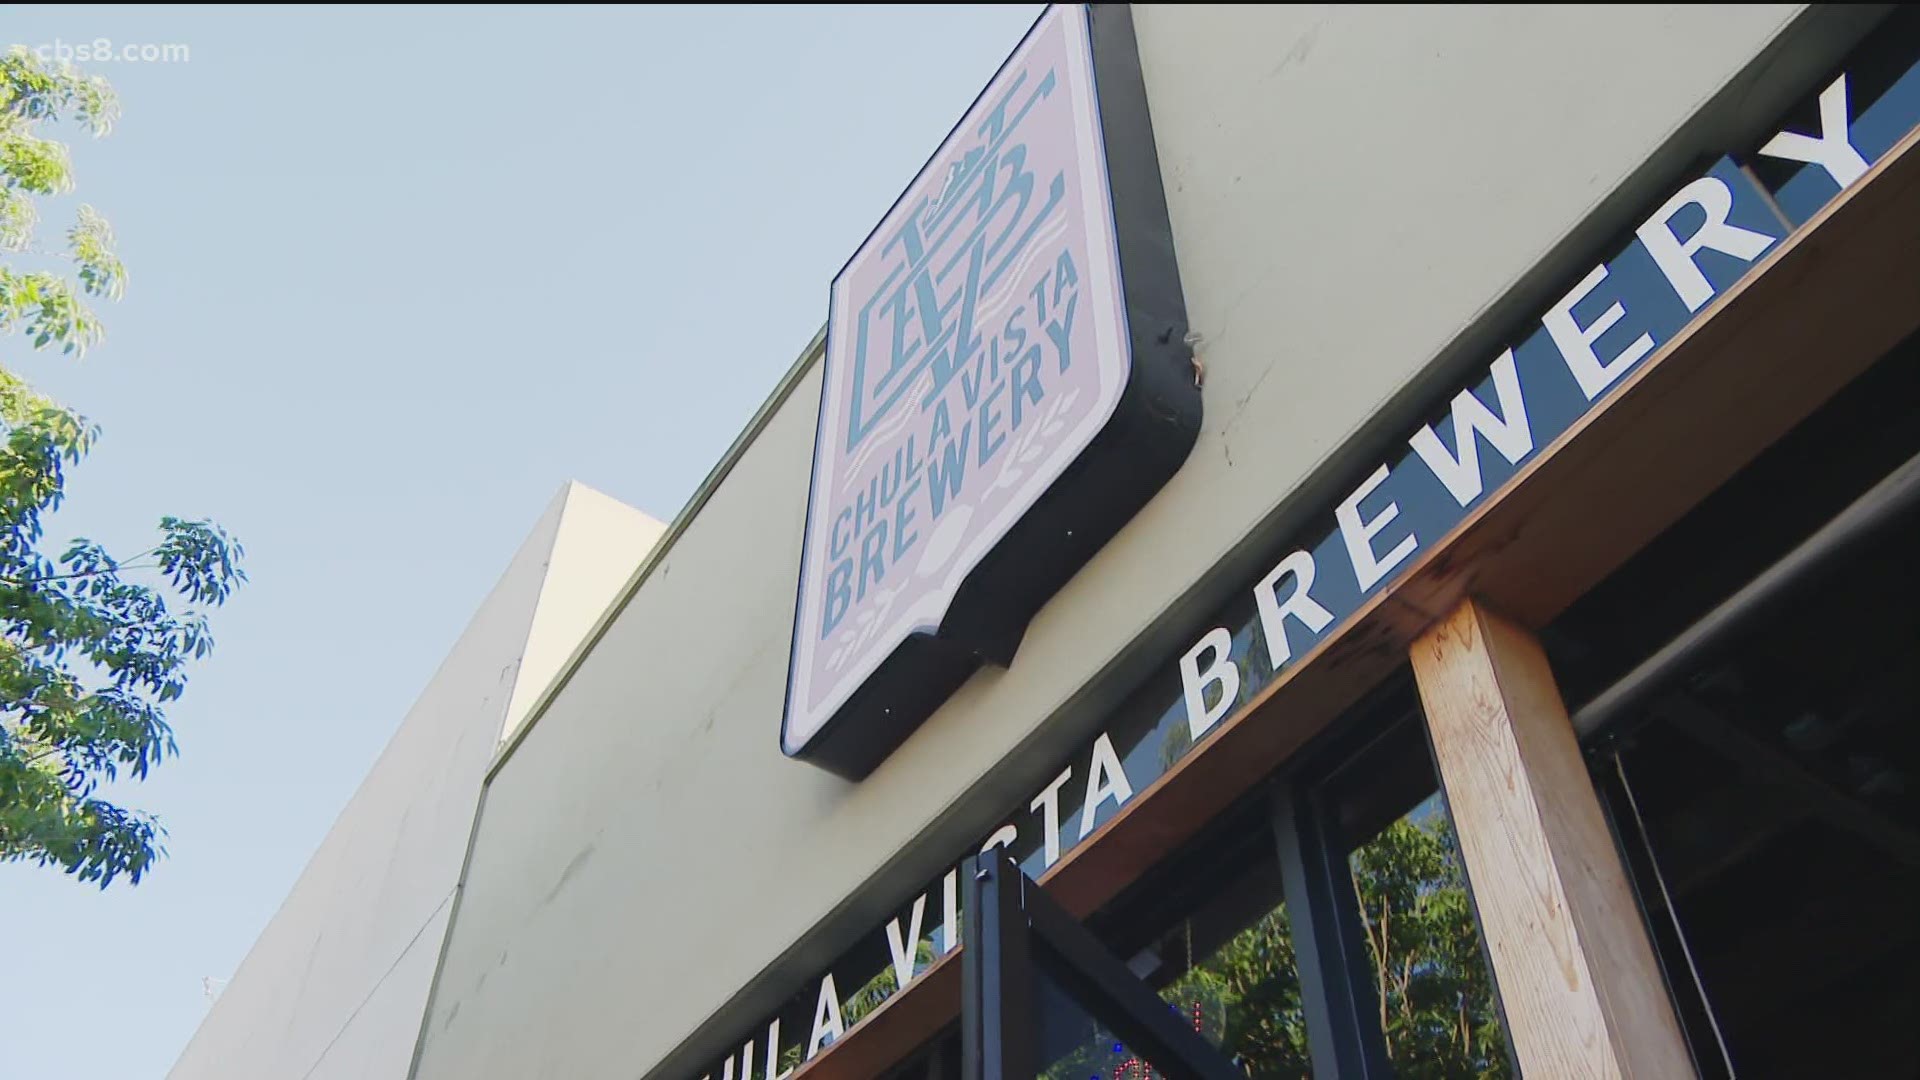 After denying two men entry into the Chula Vista Brewery, a fight broke out between the men and security guards. Then shots rang out.